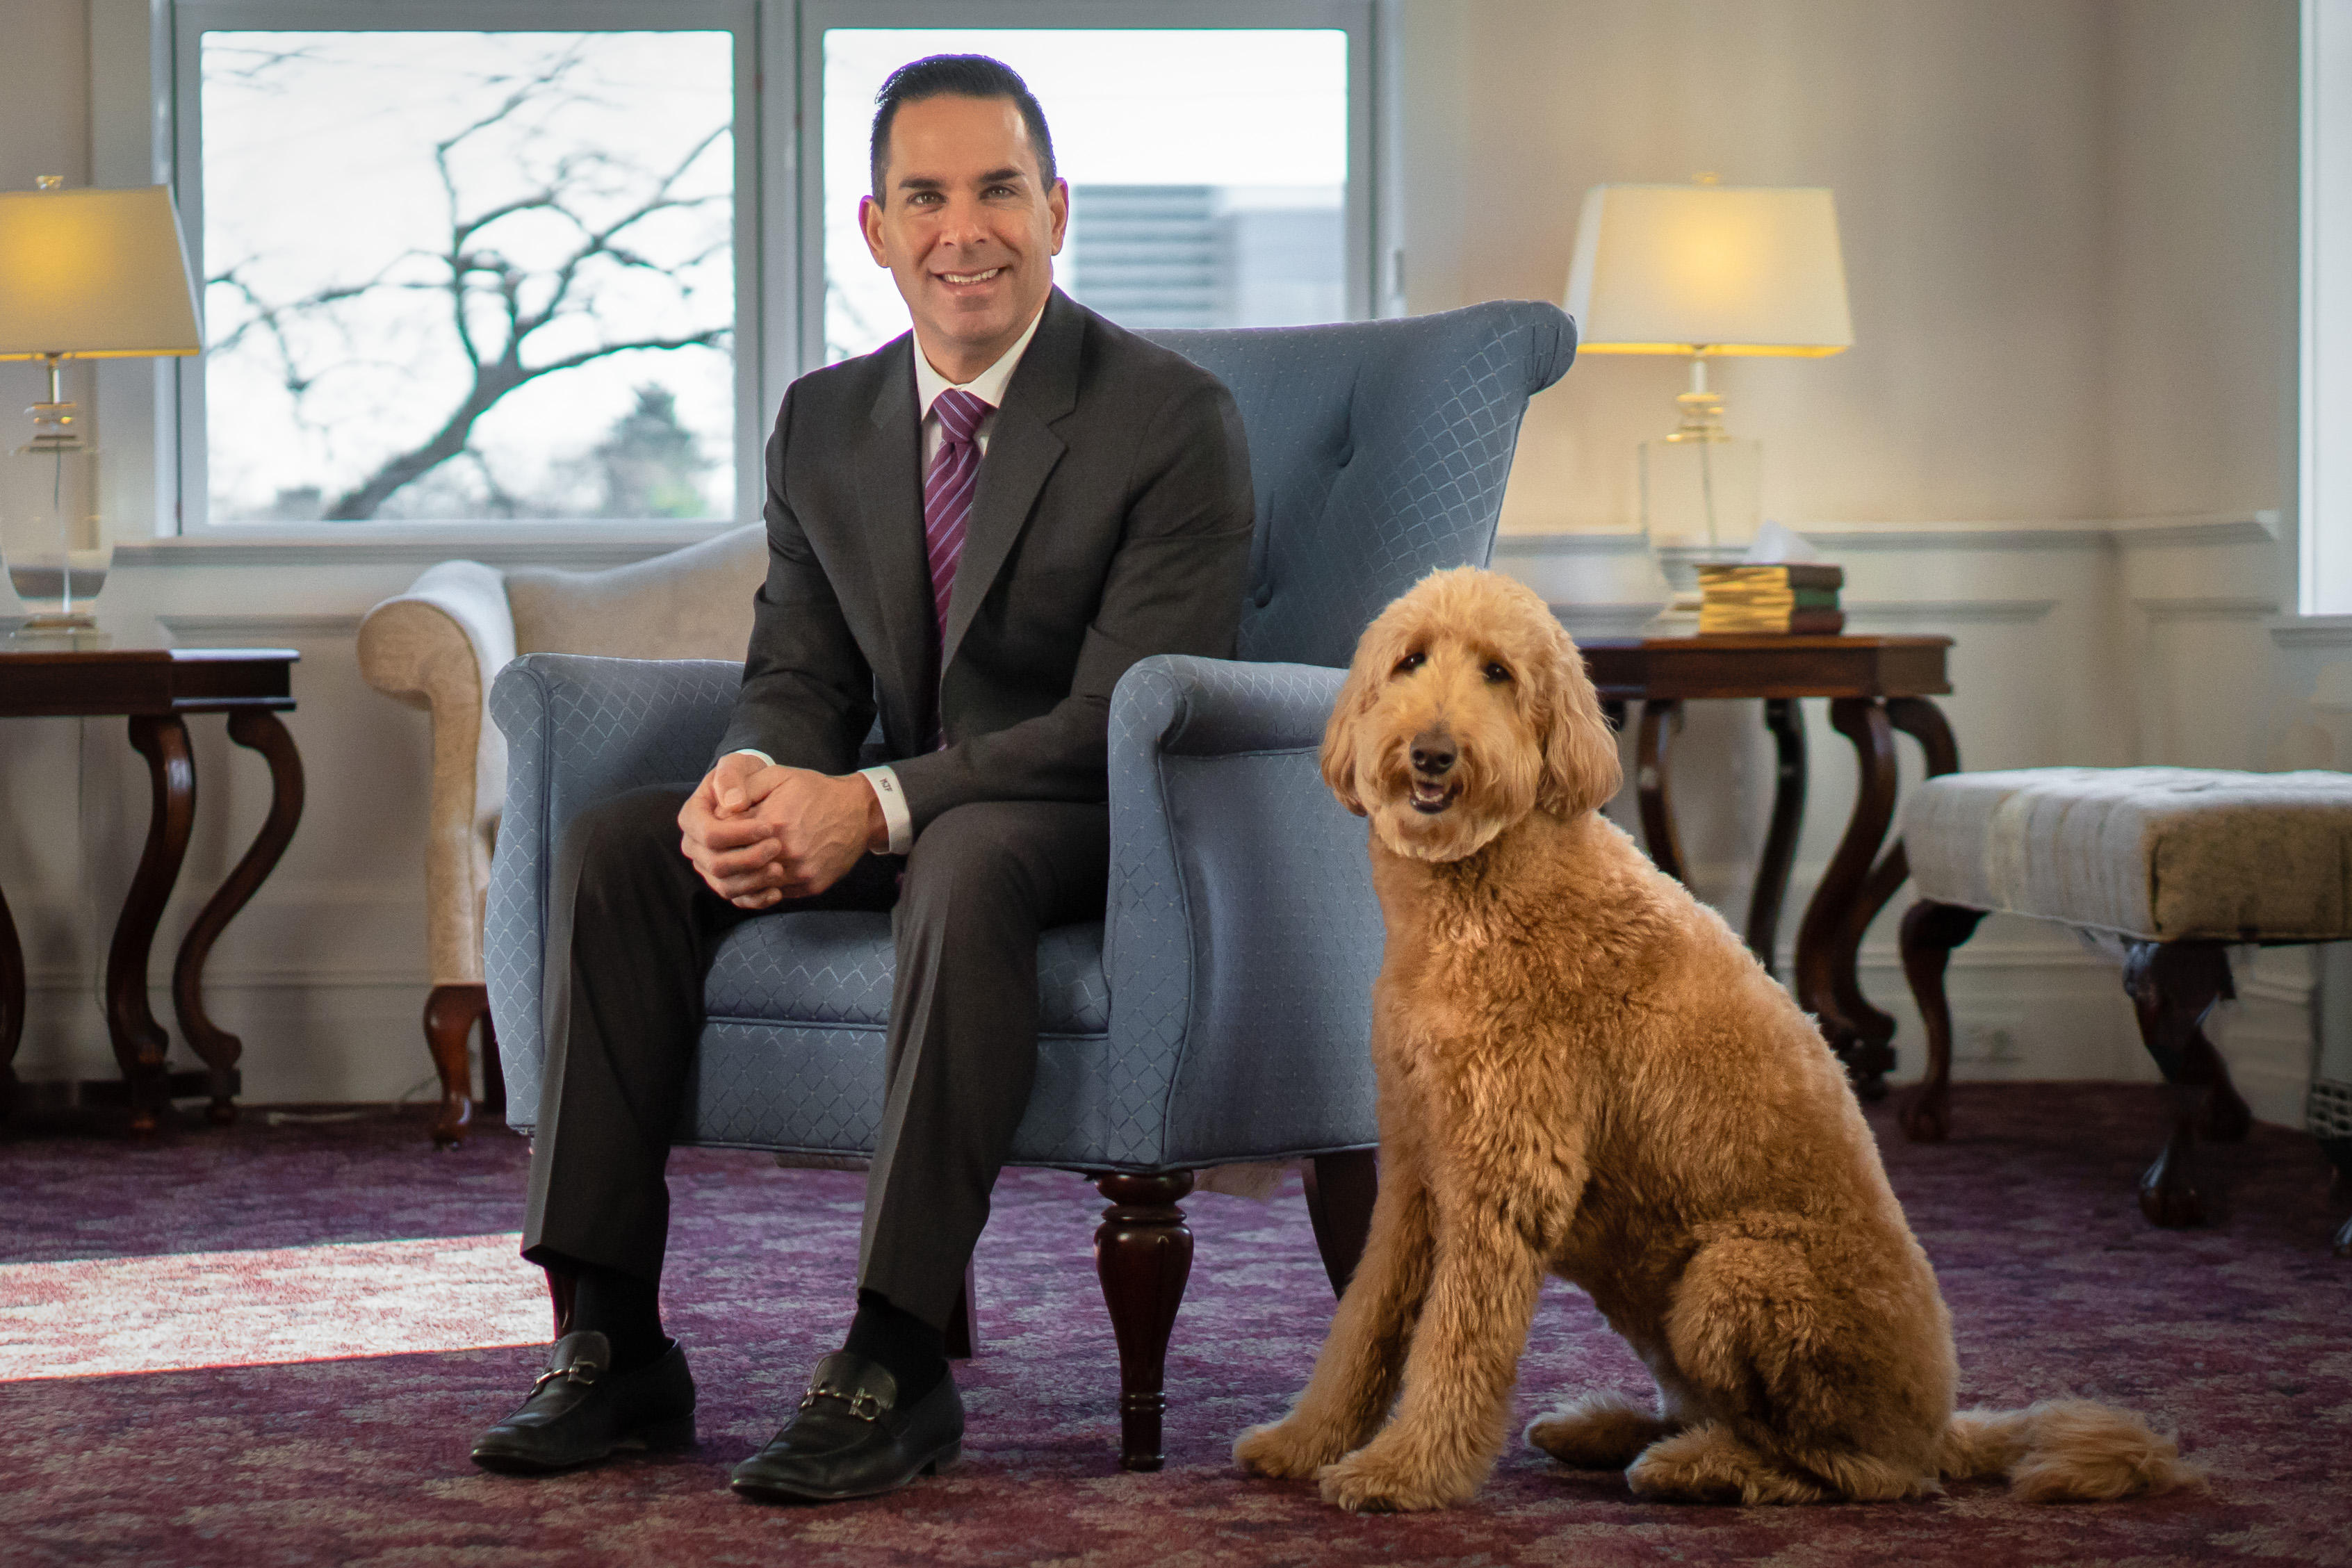 Matthew Fiorillo along Therapy Dog, Lulu, of Libby Funeral & Cremation Services